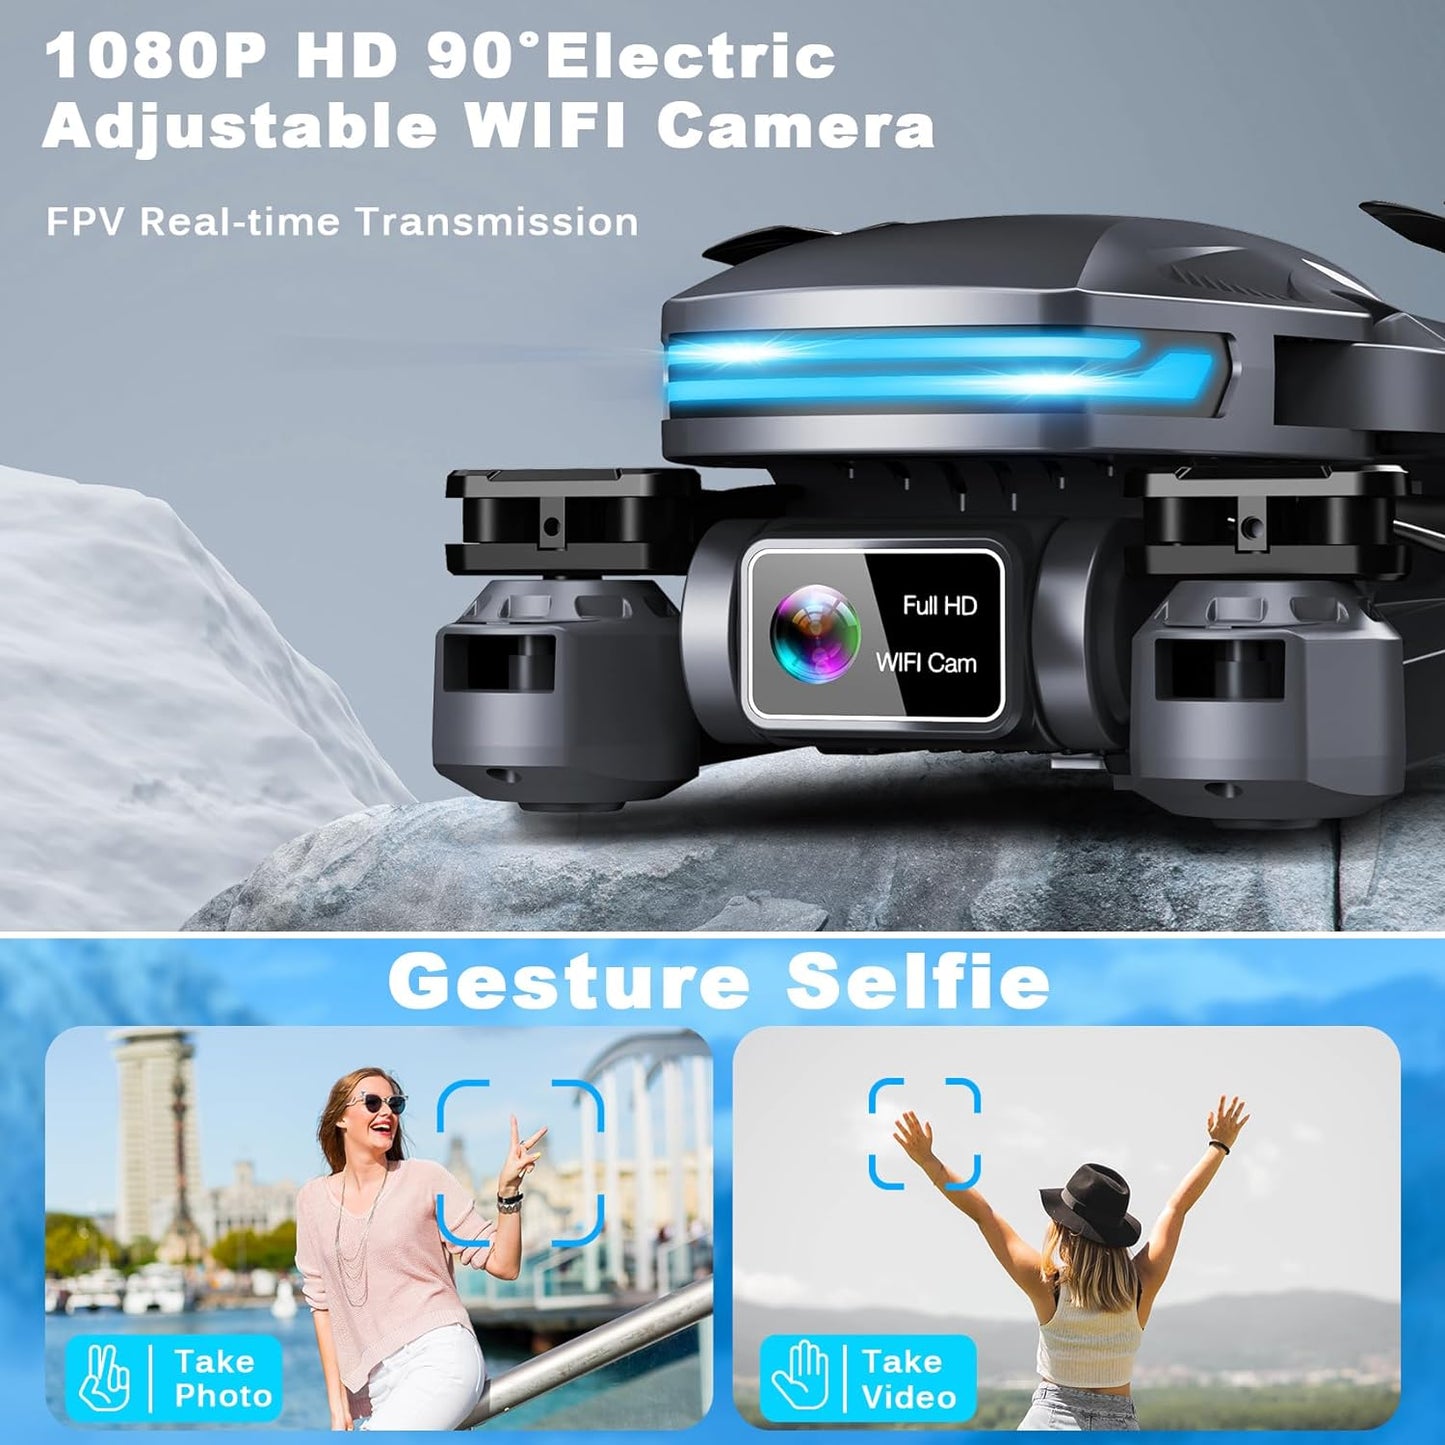 Loiley S29 Drone, FPV Real-time Transmission Full HD WIFI Cam Ges